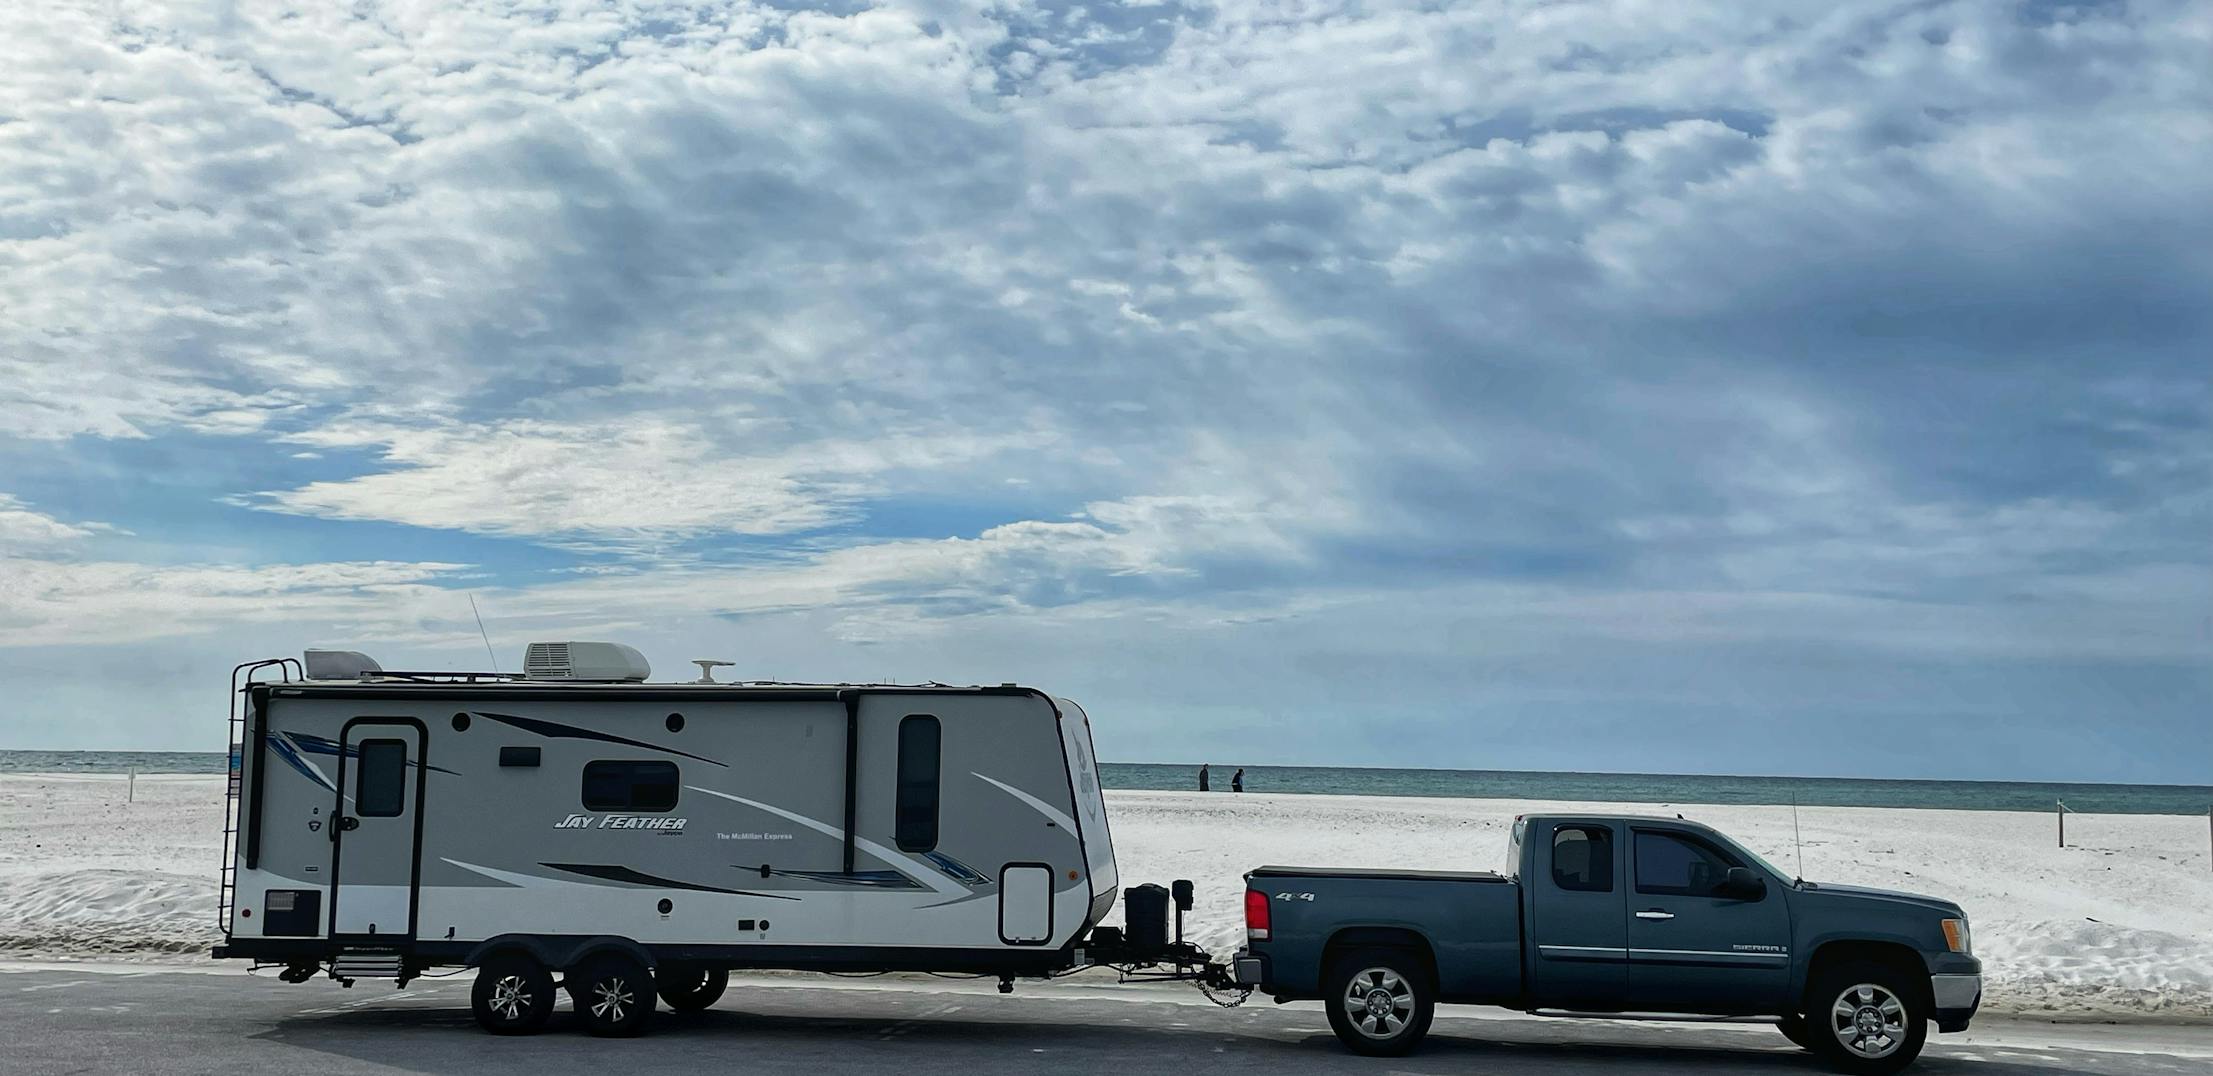 Ben and Christina McMillan's Jayco Jay Feather travel trailer at the beach near Fort Pickens